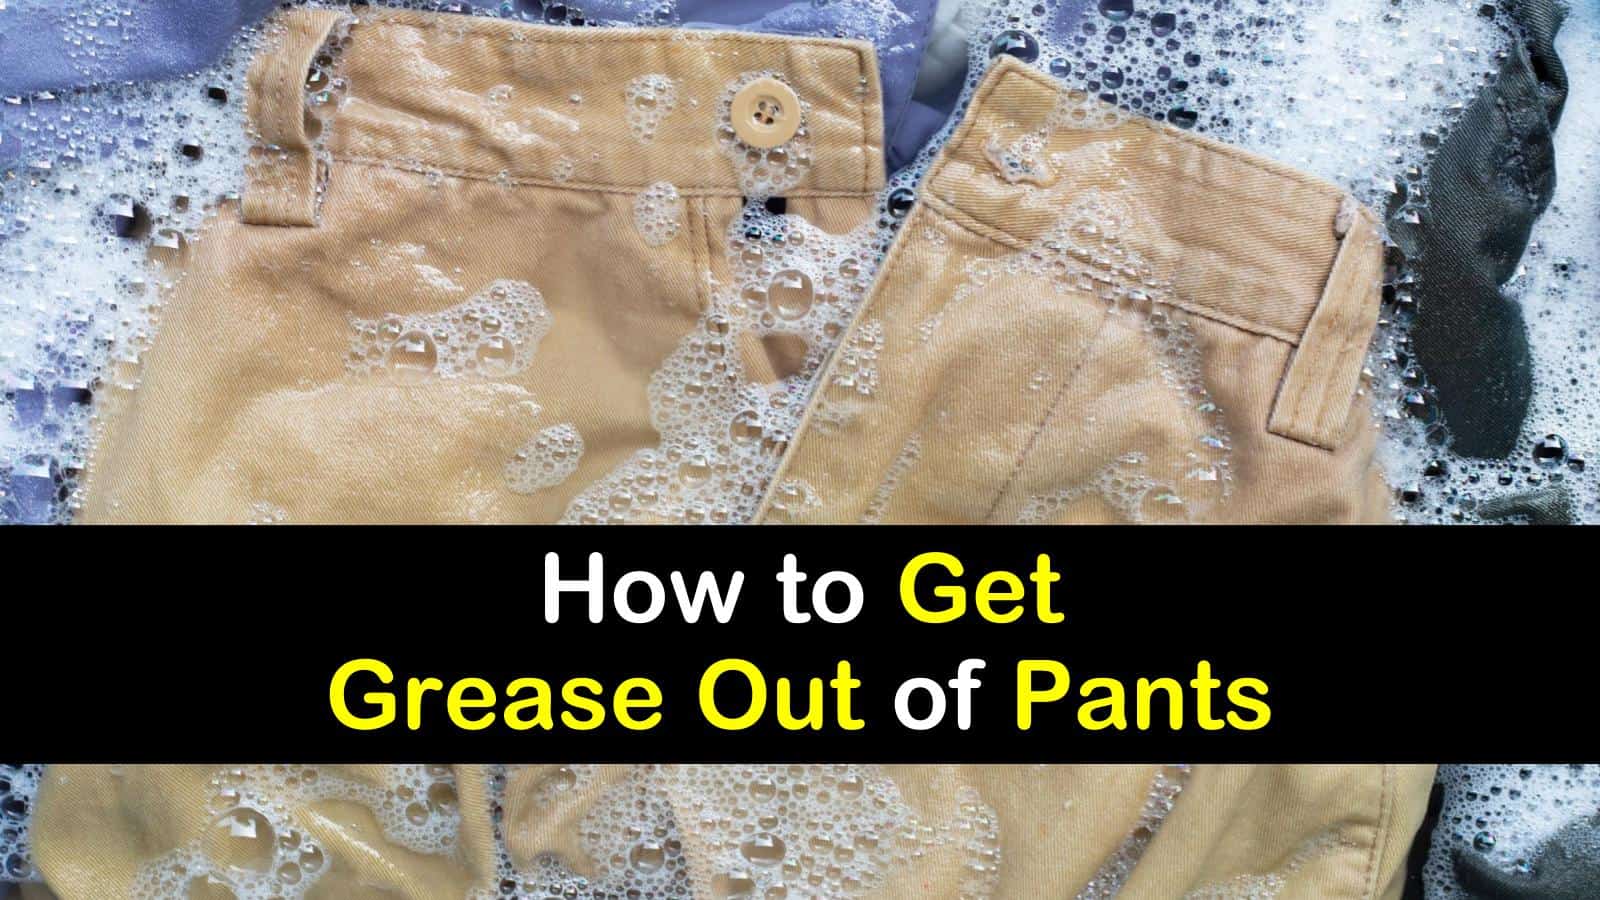 how to get grease out of pants titleimg1